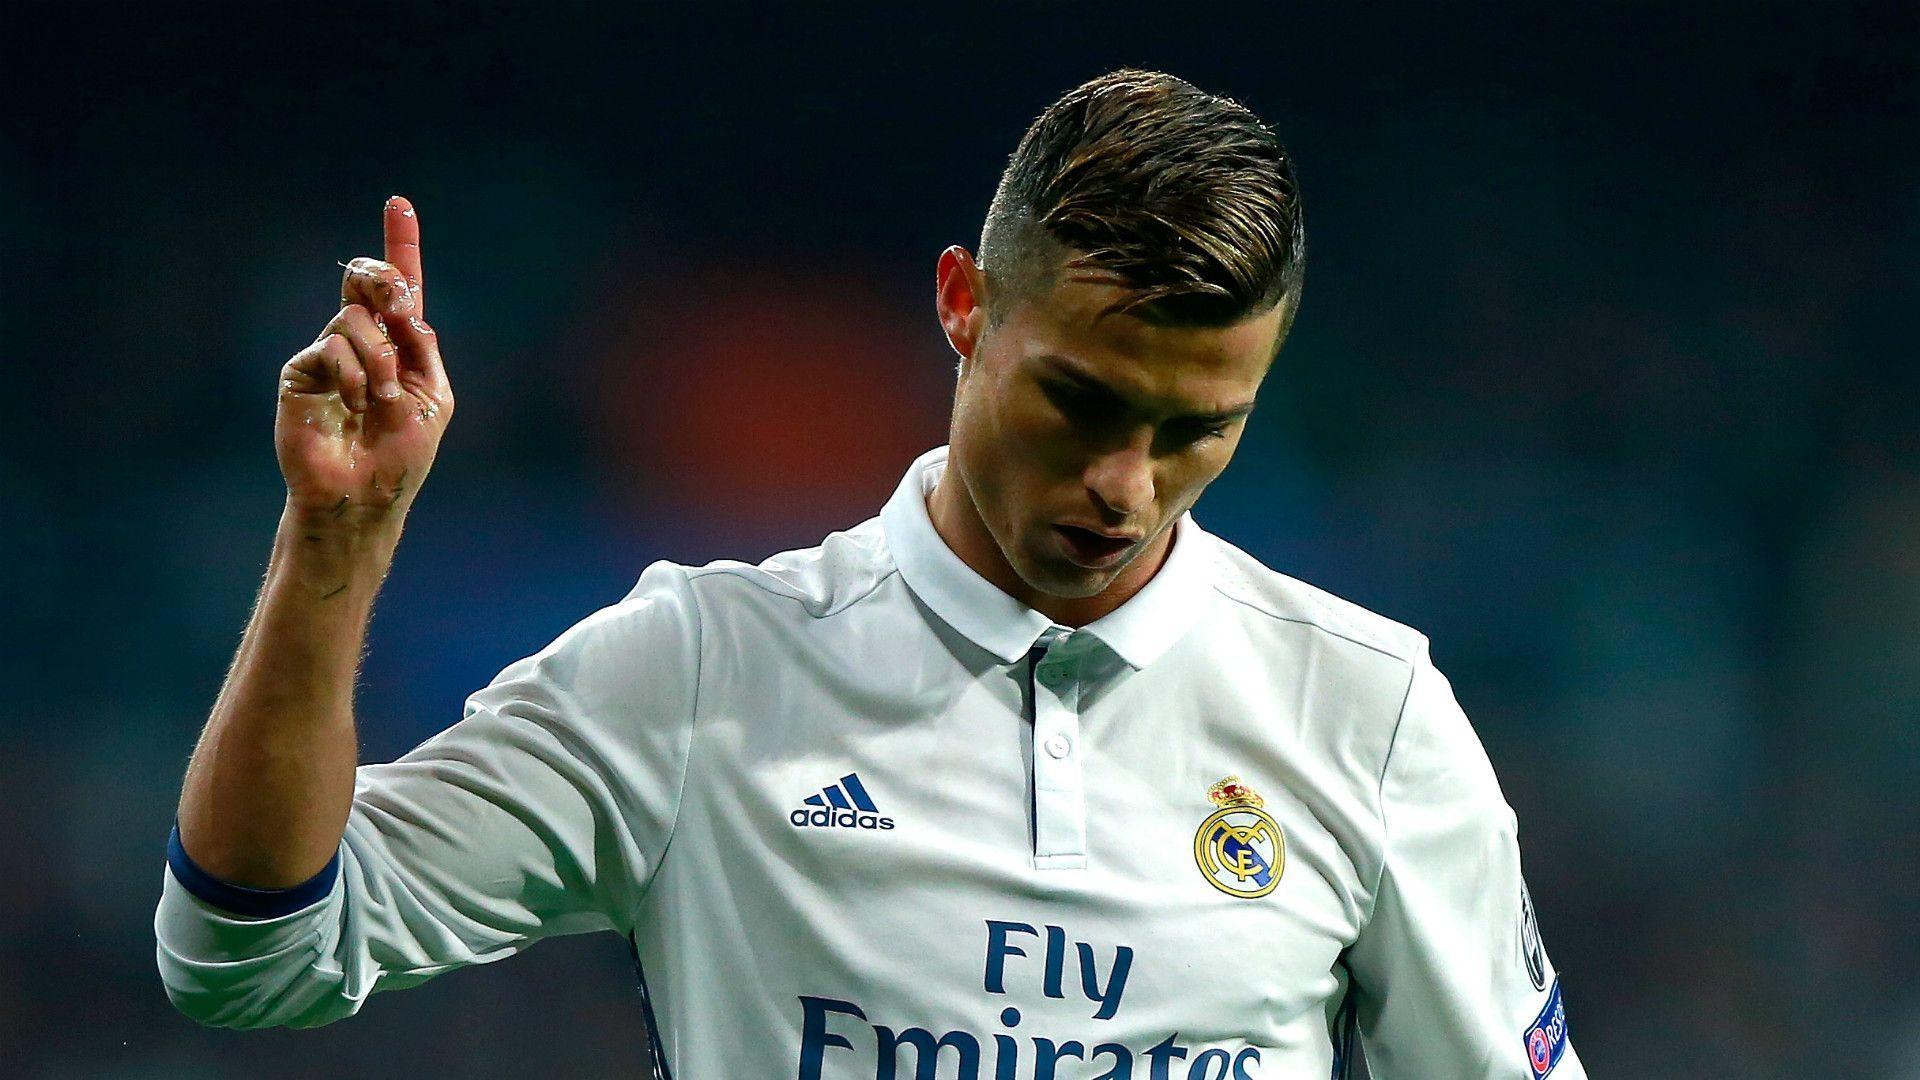 RUMOURS: Real Madrid To Sell Ronaldo By 2018 19